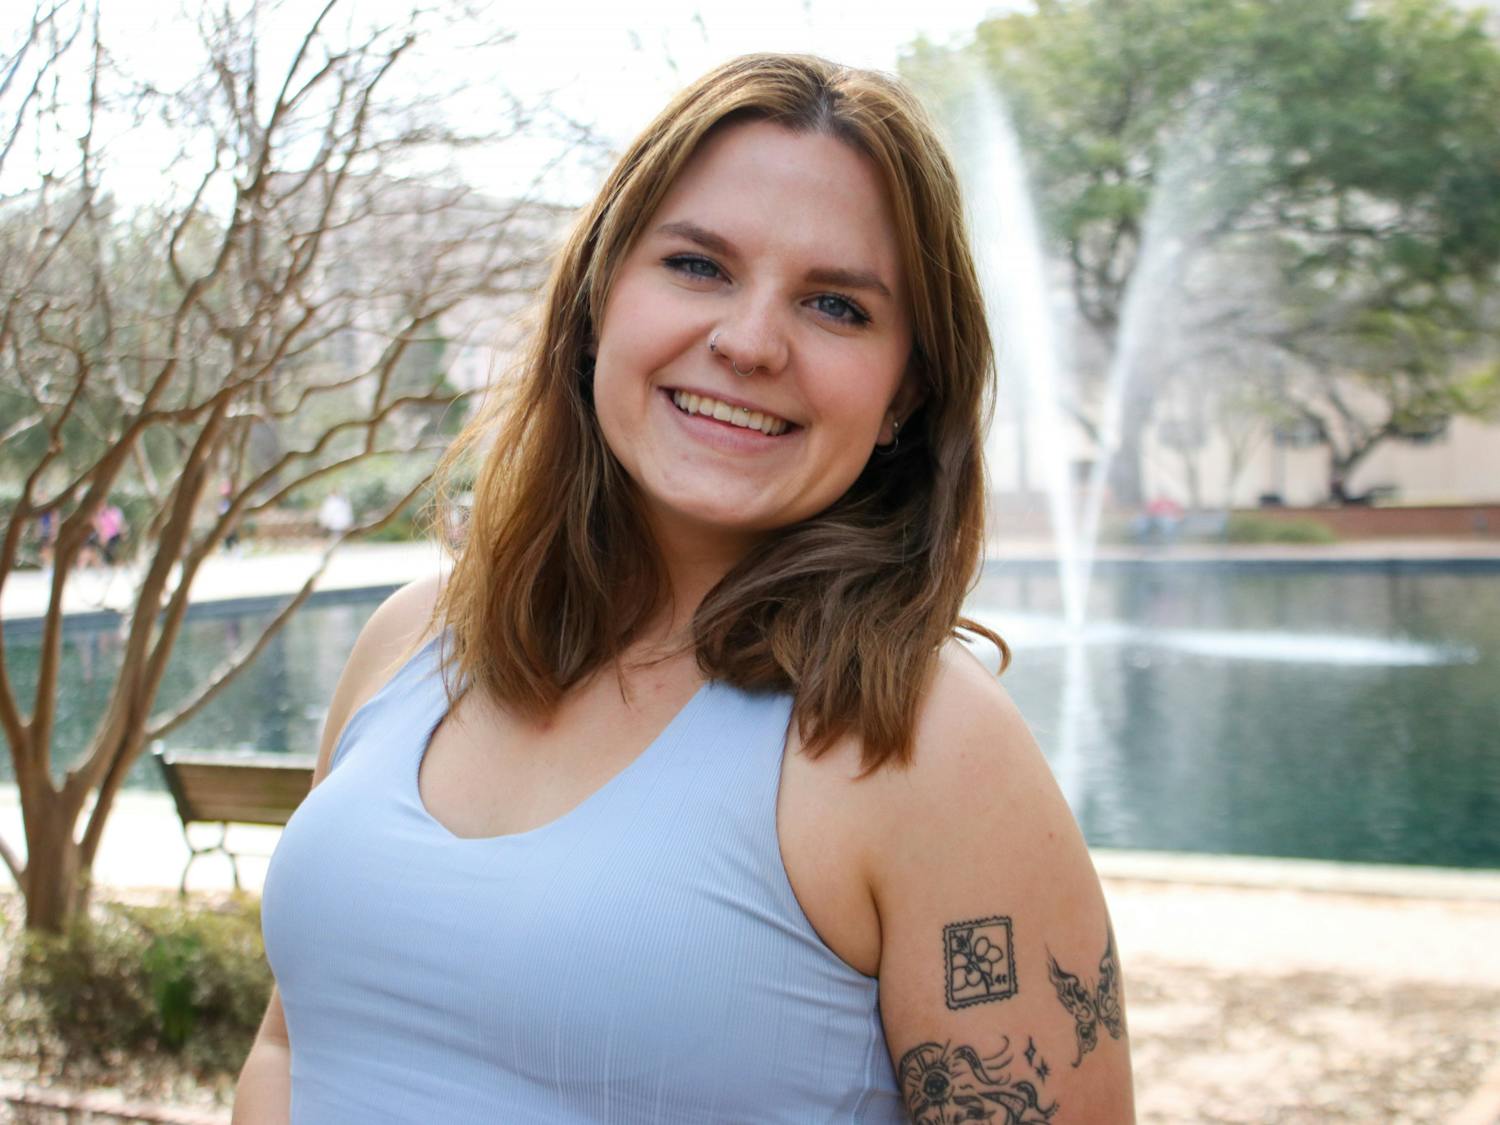 Fourth-year English student Syd Sandford is one of many in her generation that uses tattoos as a form of self expression. She carries on her skin a permanent collection of ink that ties her to family, friends and herself, that not only connect Sandford to her key life values, but help her love the woman she sees in the mirror each day. "I have beautiful pieces of art on me and I'm a carrier of those things, which just makes me inherently beautiful," Sandford said. "I may not really love how I look or my face or my hair, but like, I have these really cool pieces of art on me, and like, that’s just objectively cool." For Sandford, beauty is pain at the hands of an artist and tattoo gun, and a pain that is worth the stigma that comes with it.